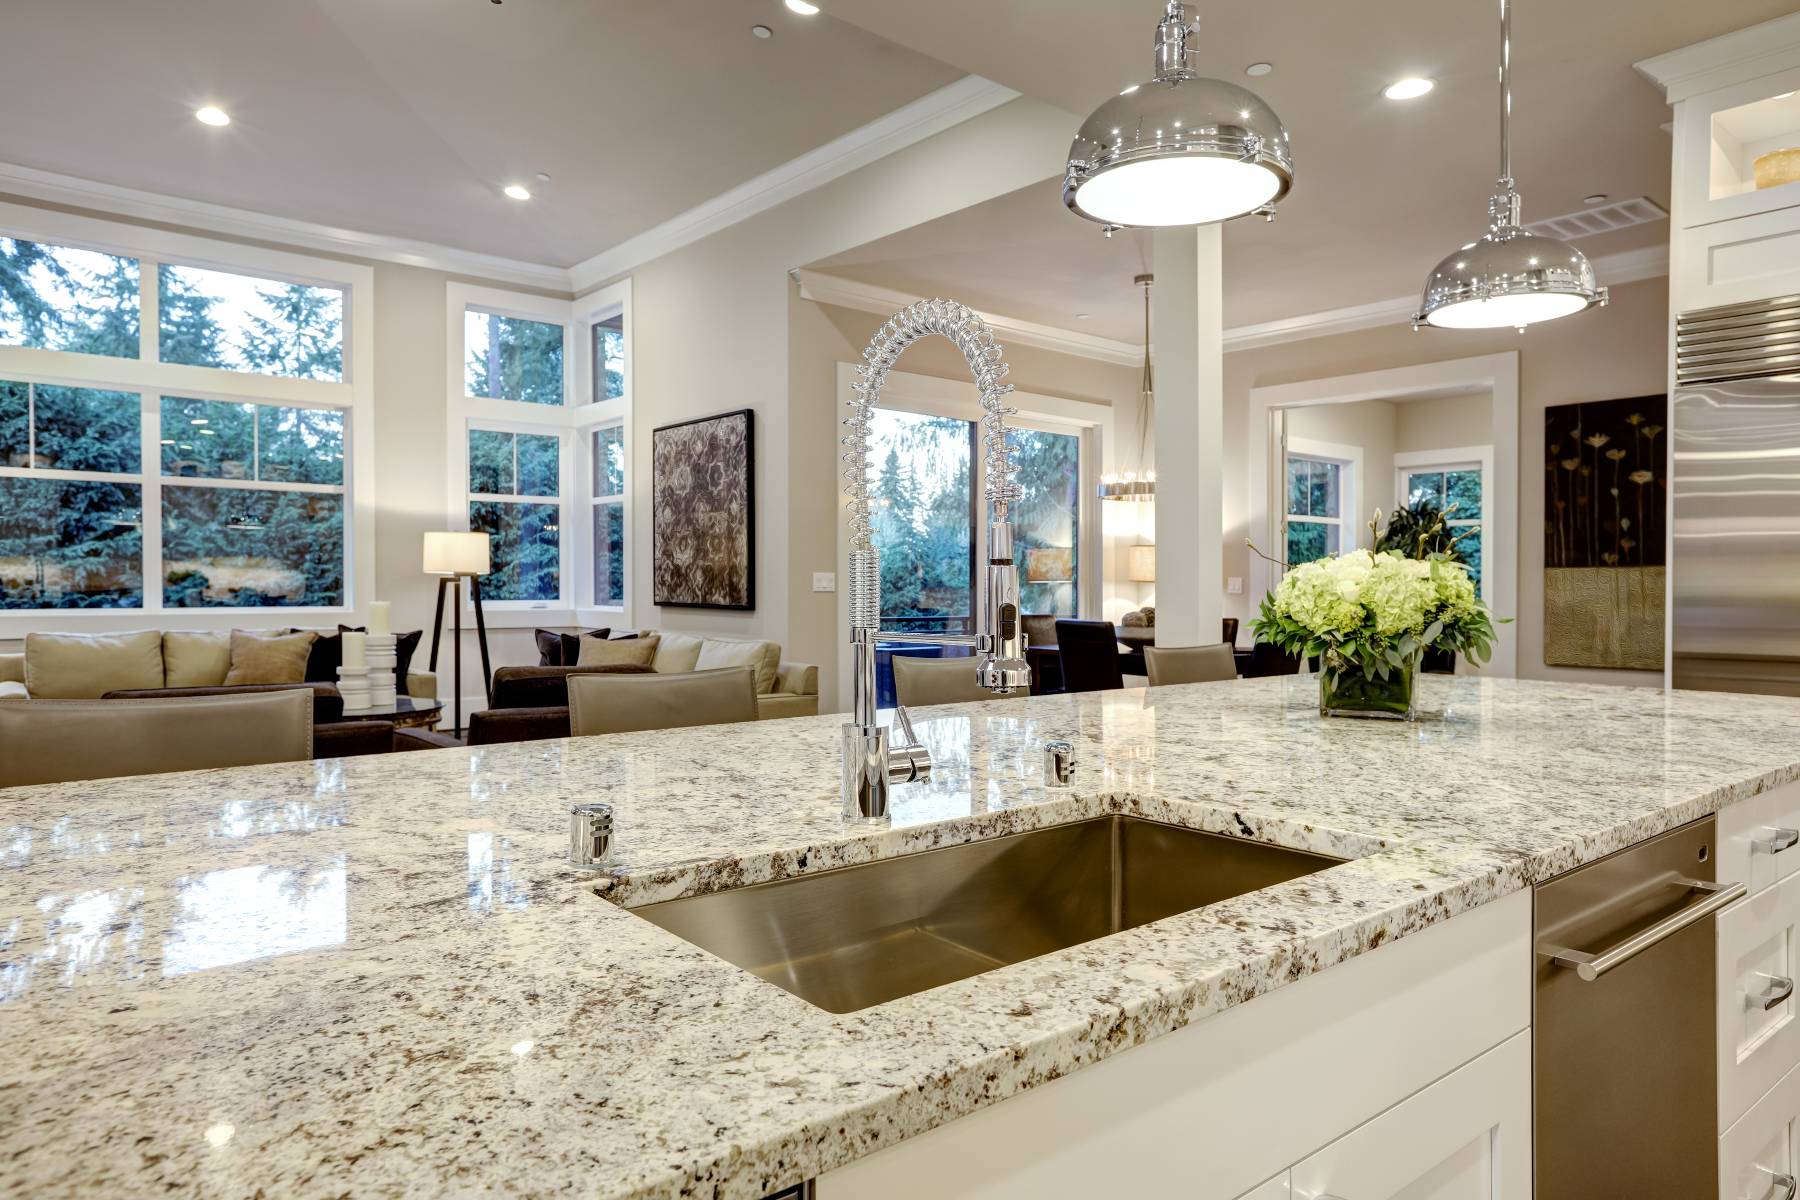 countertops in the kitchen